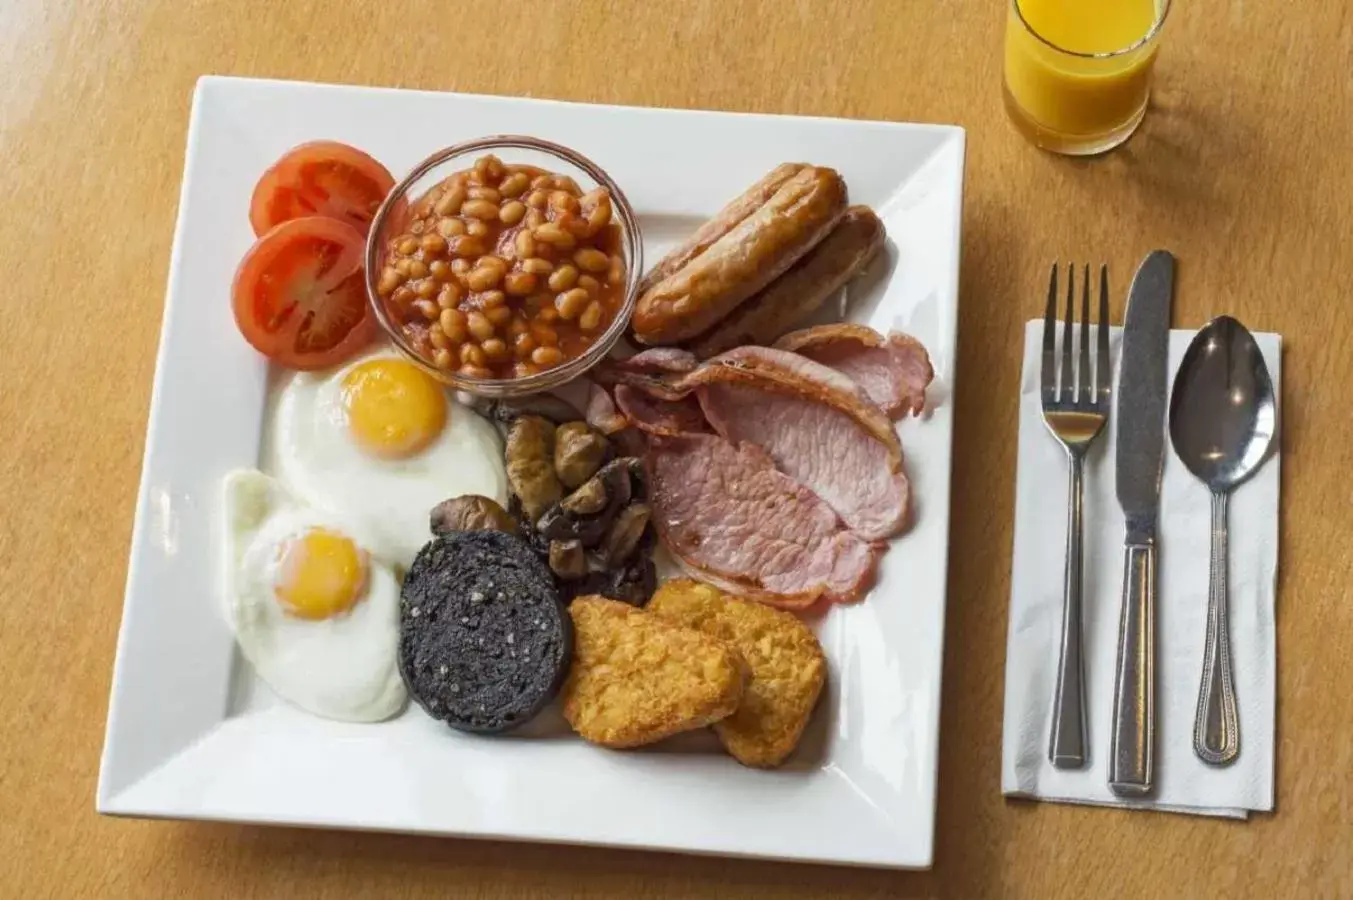 Continental breakfast in Sachas Hotel Manchester